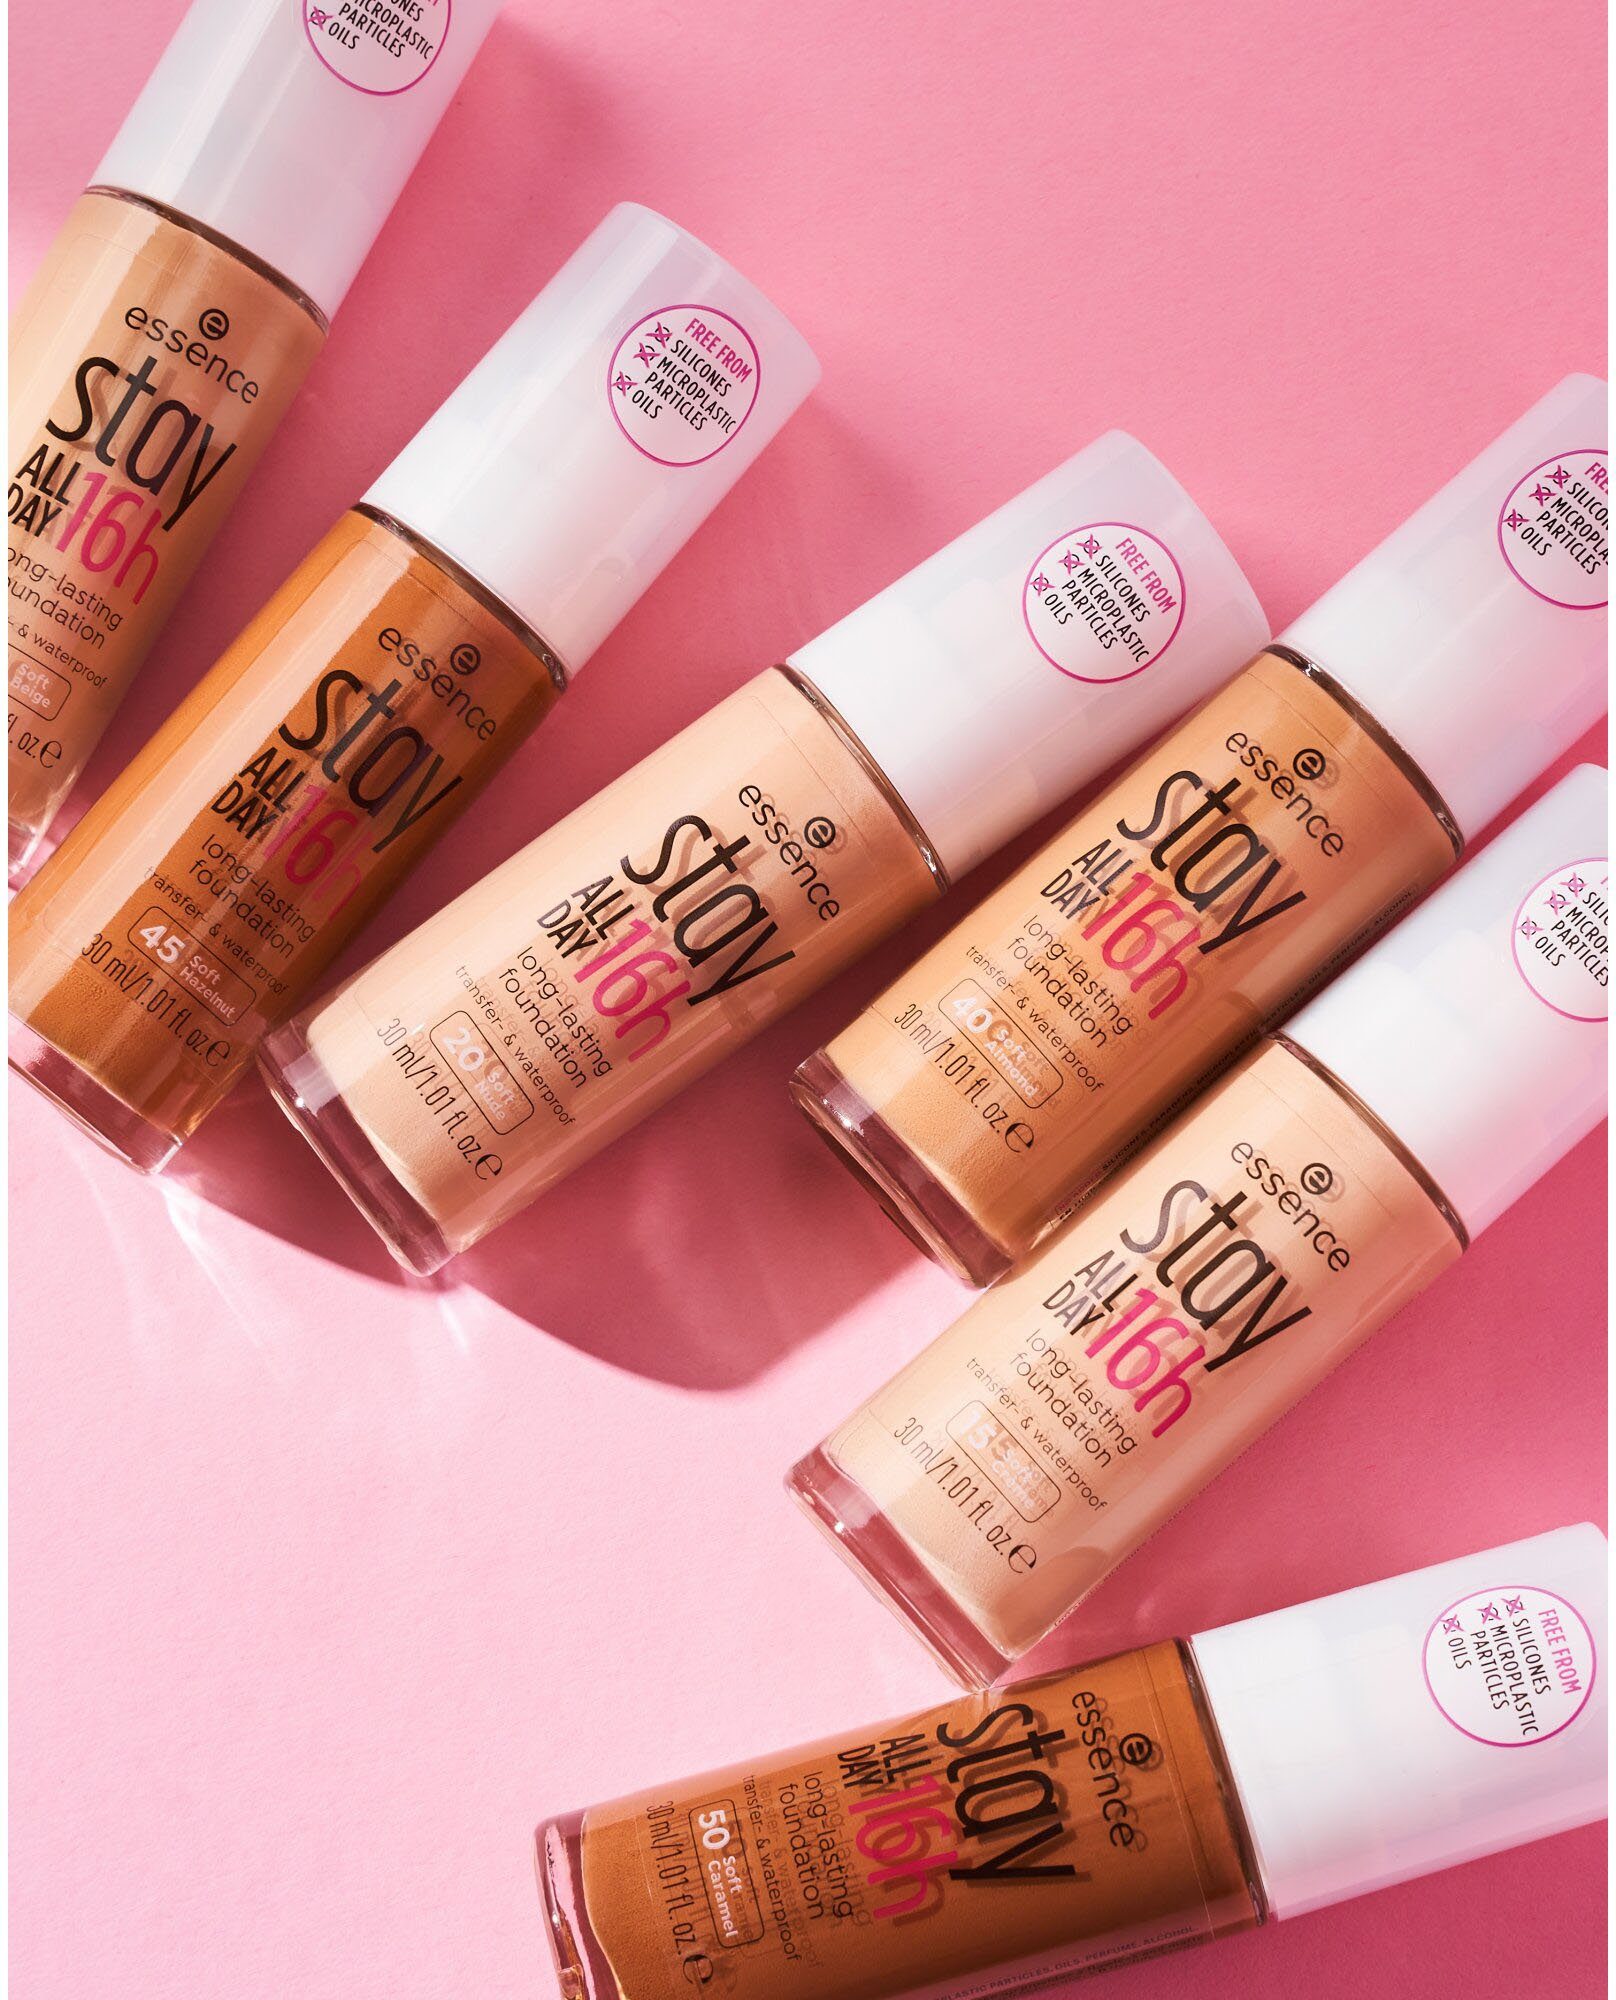 Foundation Essence 3-tlg. Creme long-lasting, Soft DAY stay ALL 16h